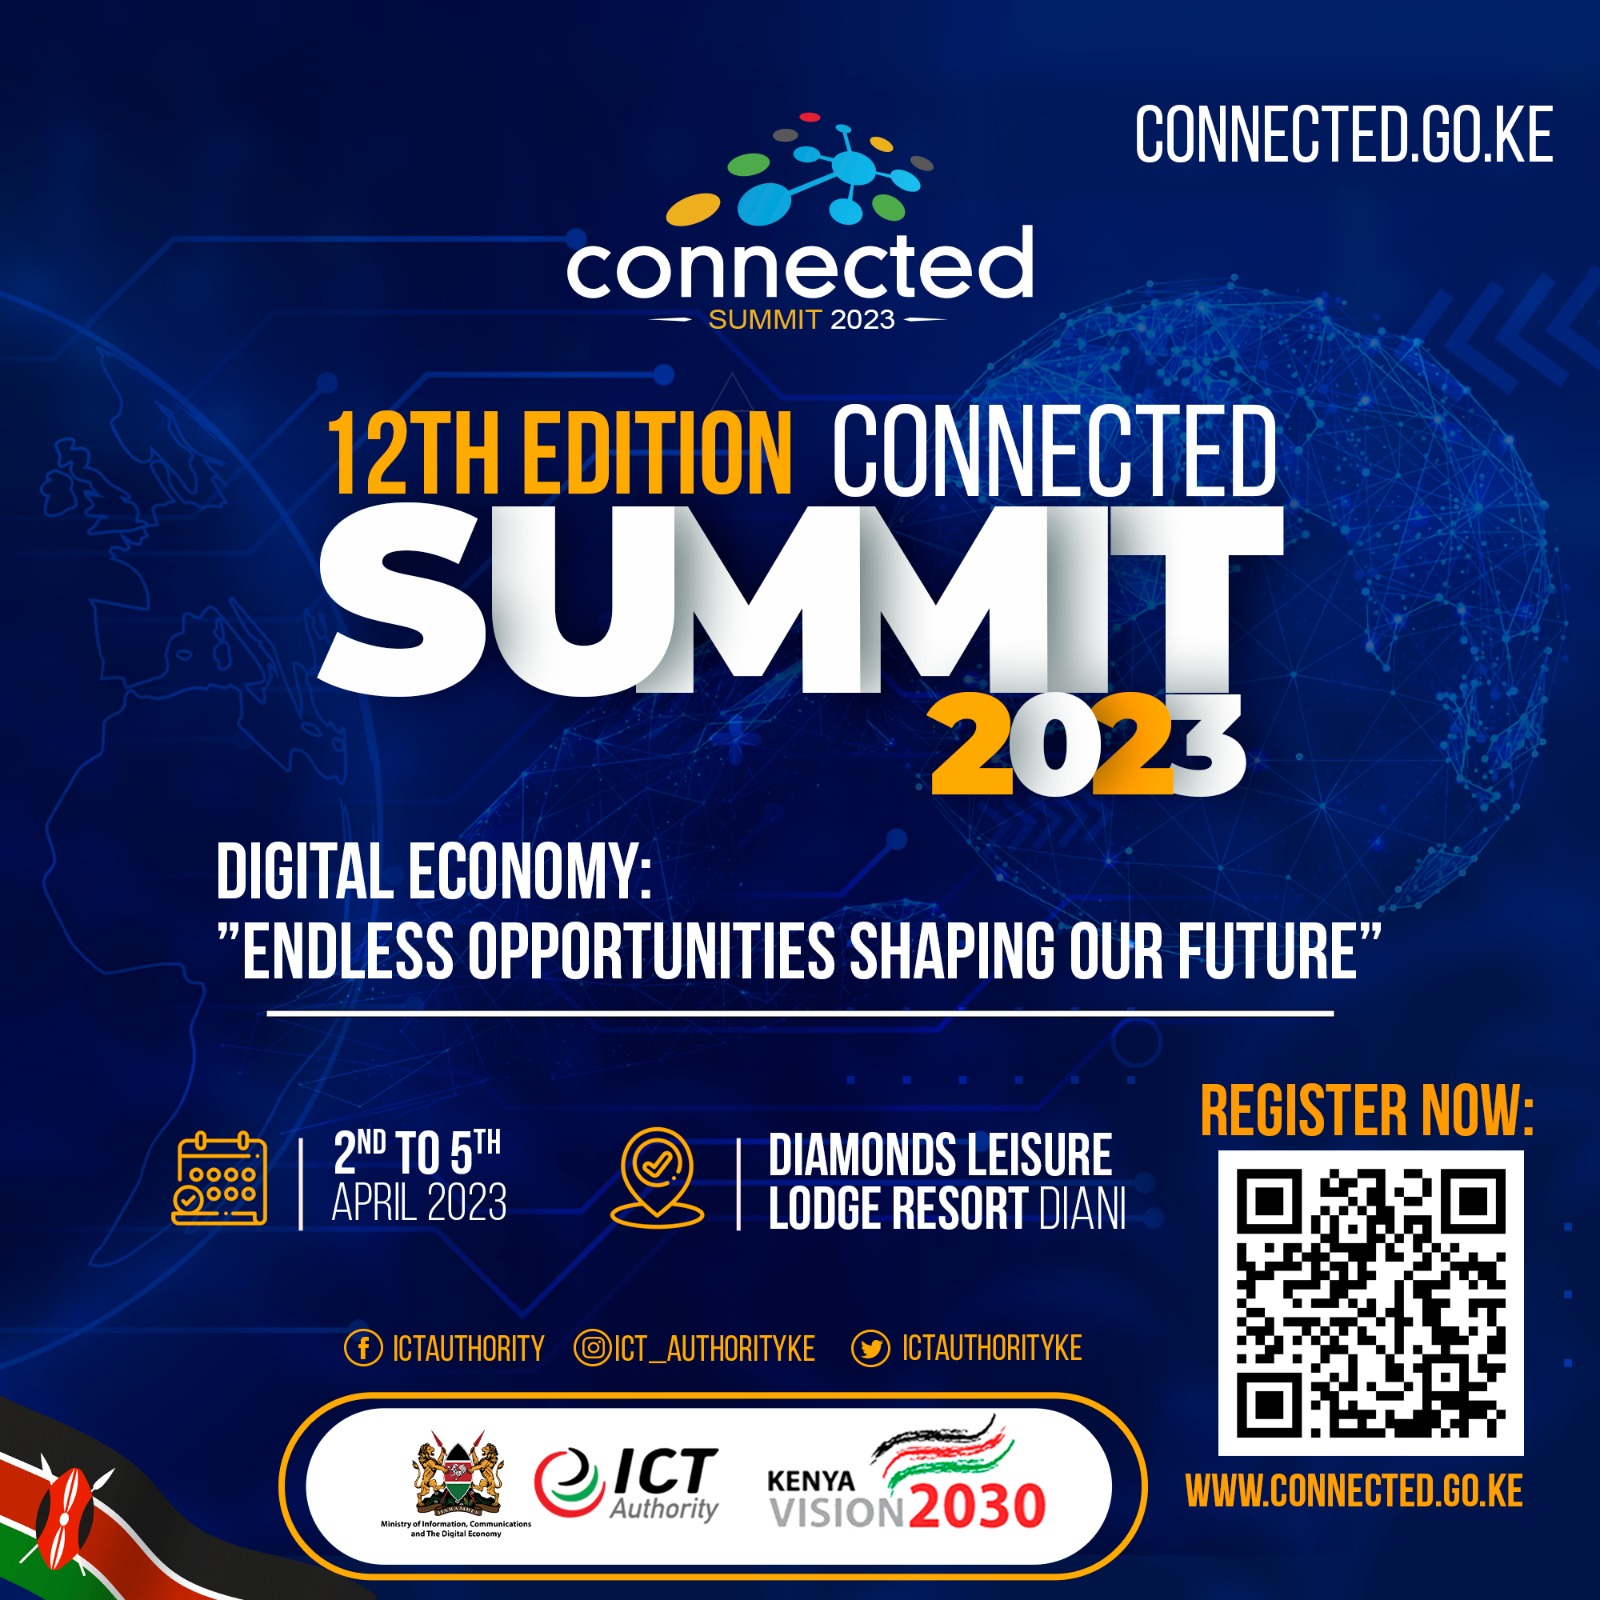 Objectives for Connected Kenya 2022 Summit Connected Summit 2023